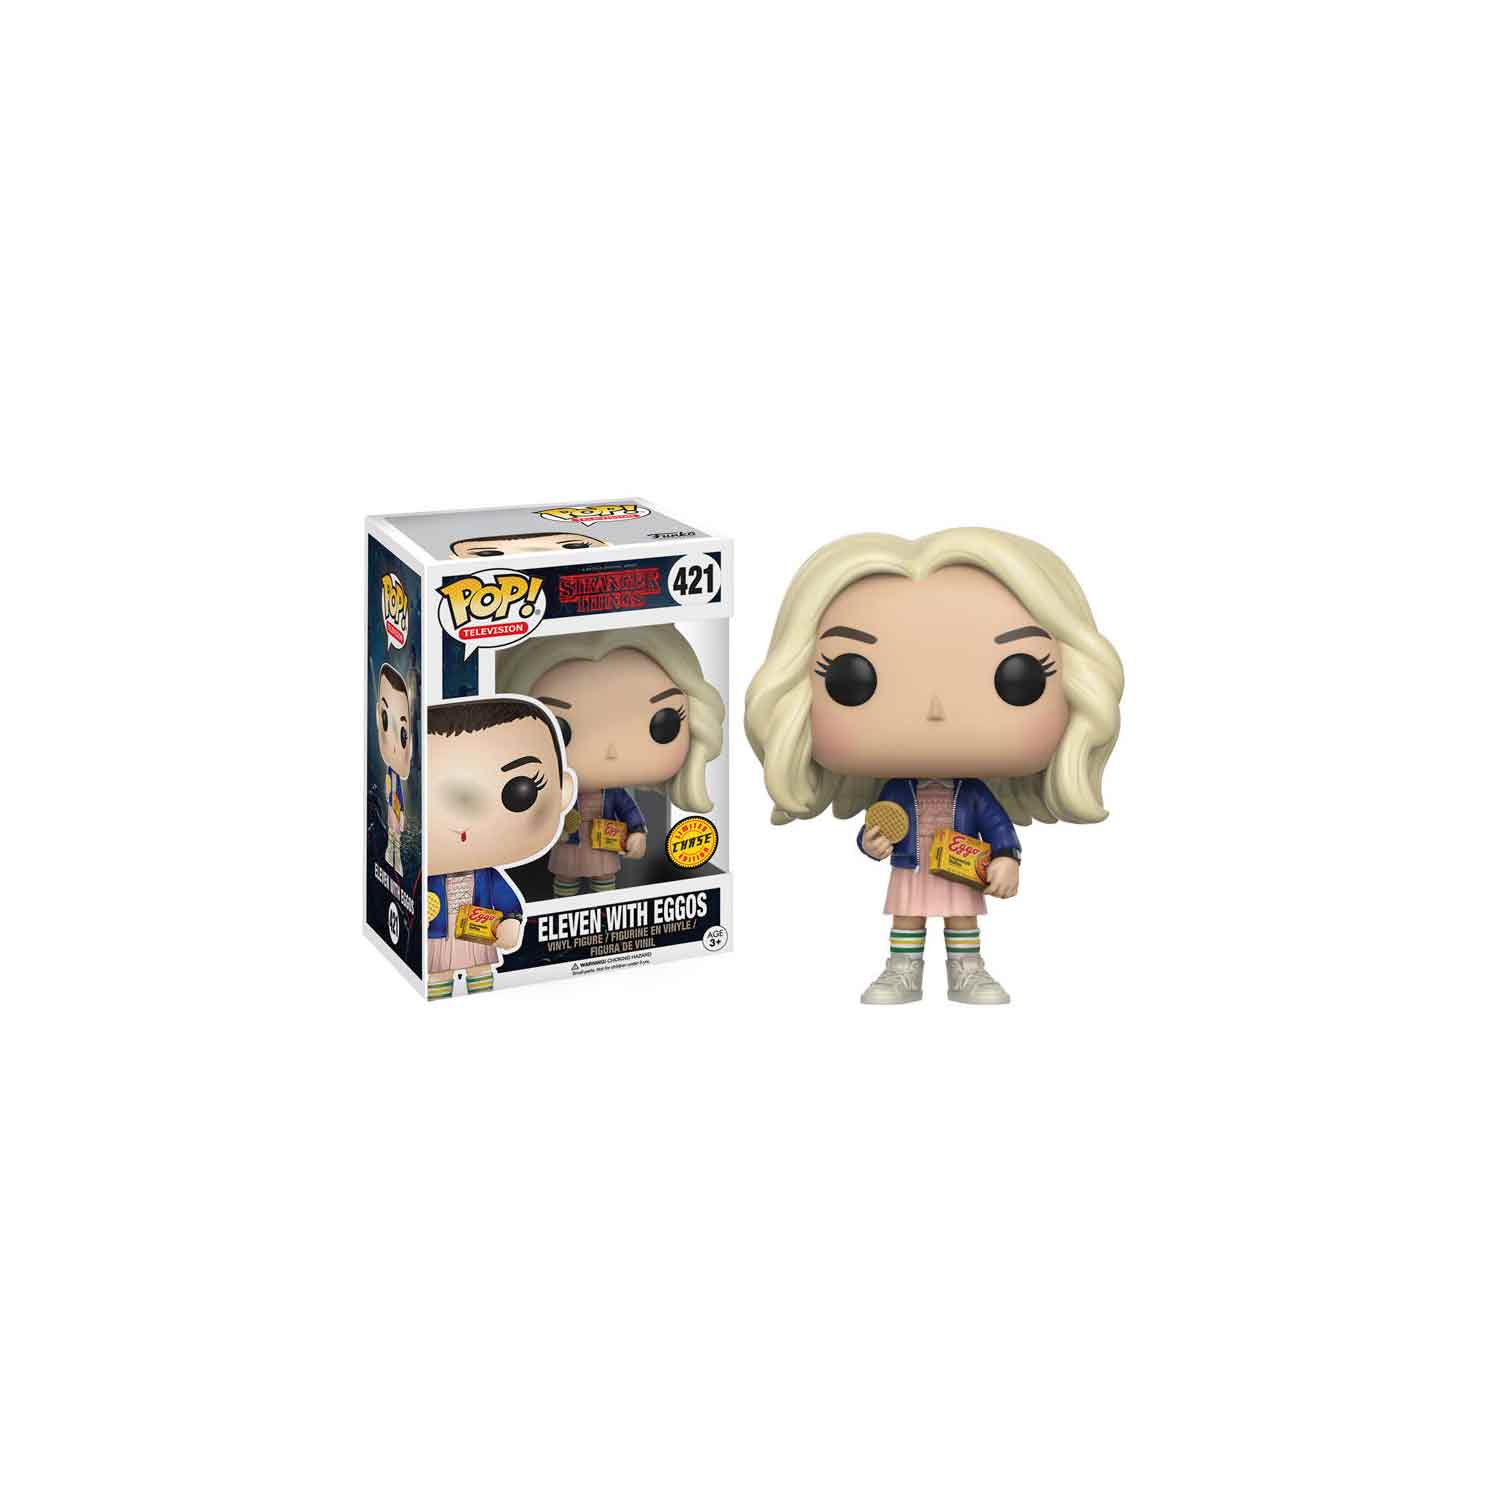 stranger-things-eleven-with-eggos-chase-funko-pop